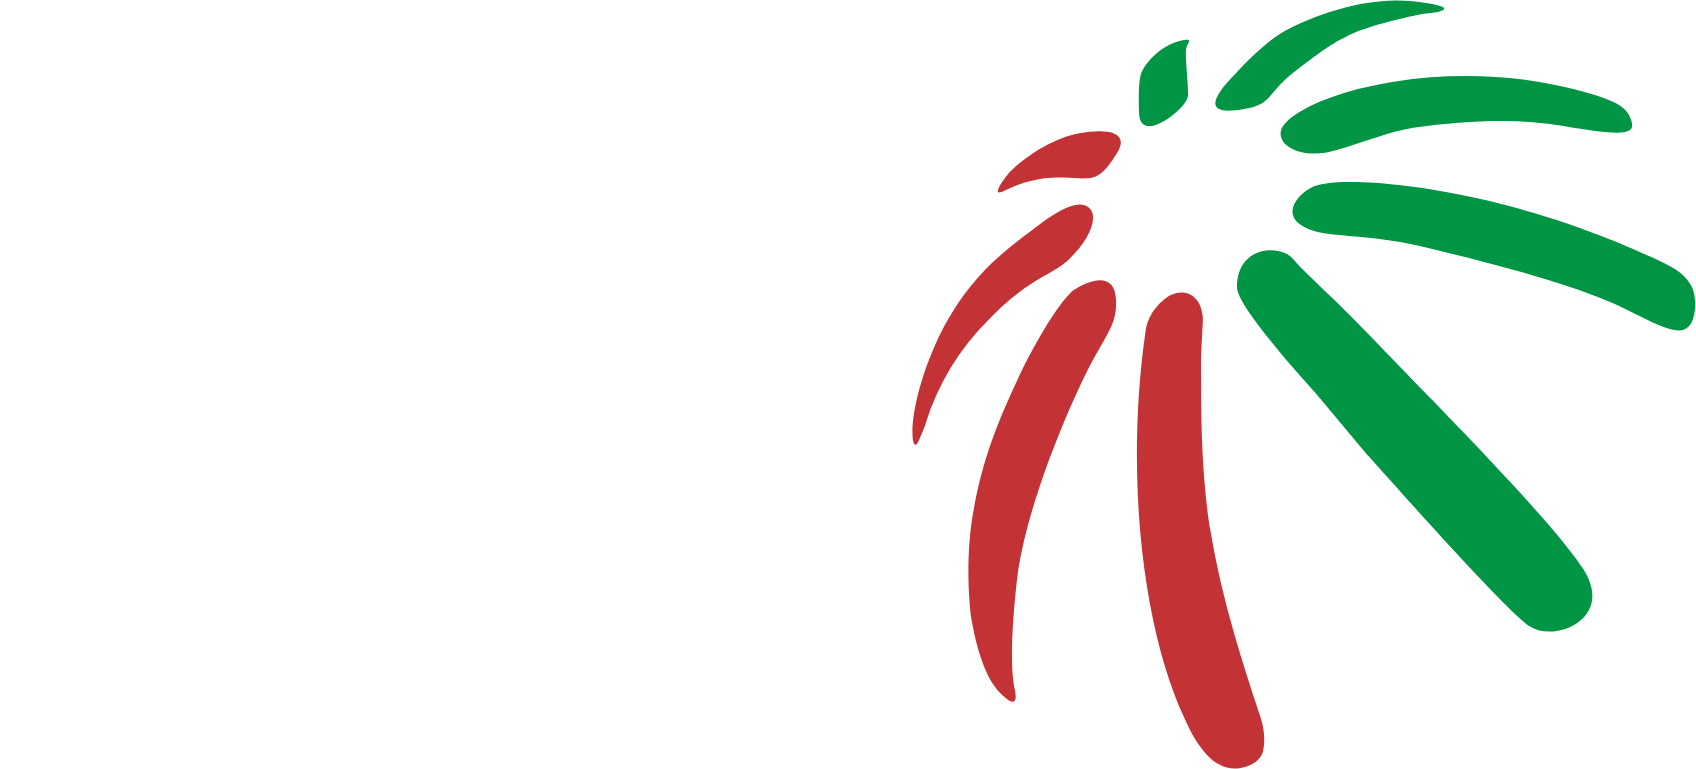 Petro Rabigh
 logo large for dark backgrounds (transparent PNG)